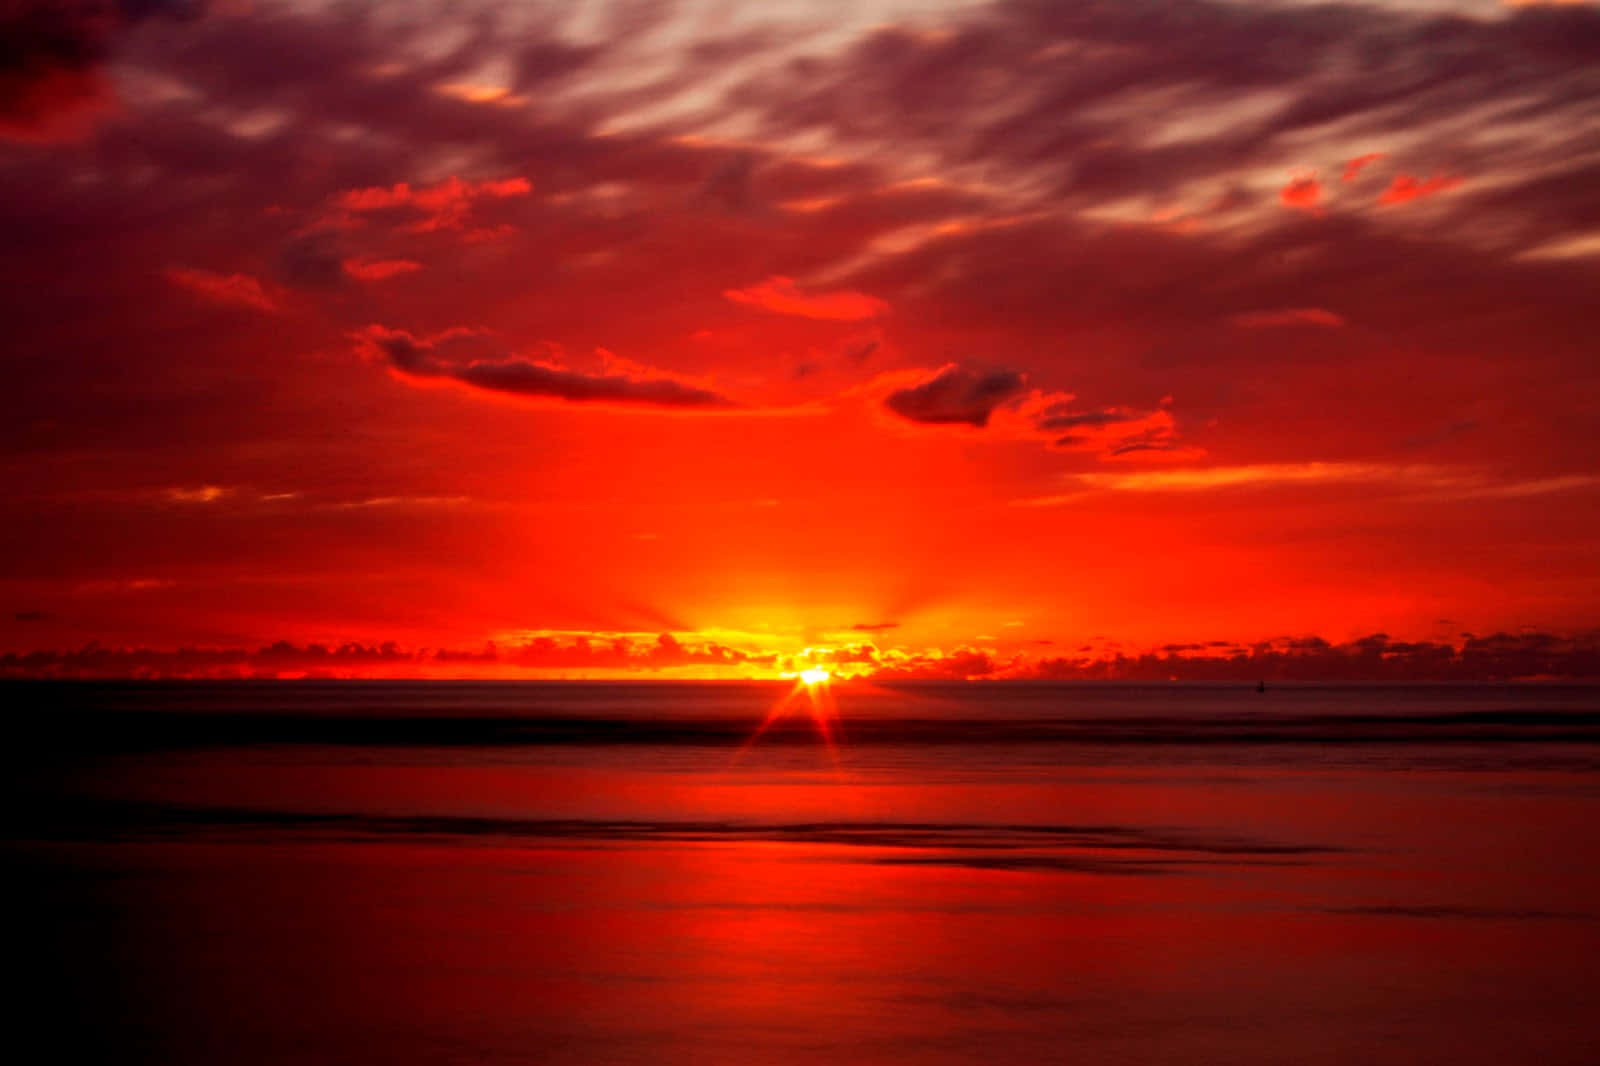 A serene beach sunset showcases the beauty of nature.